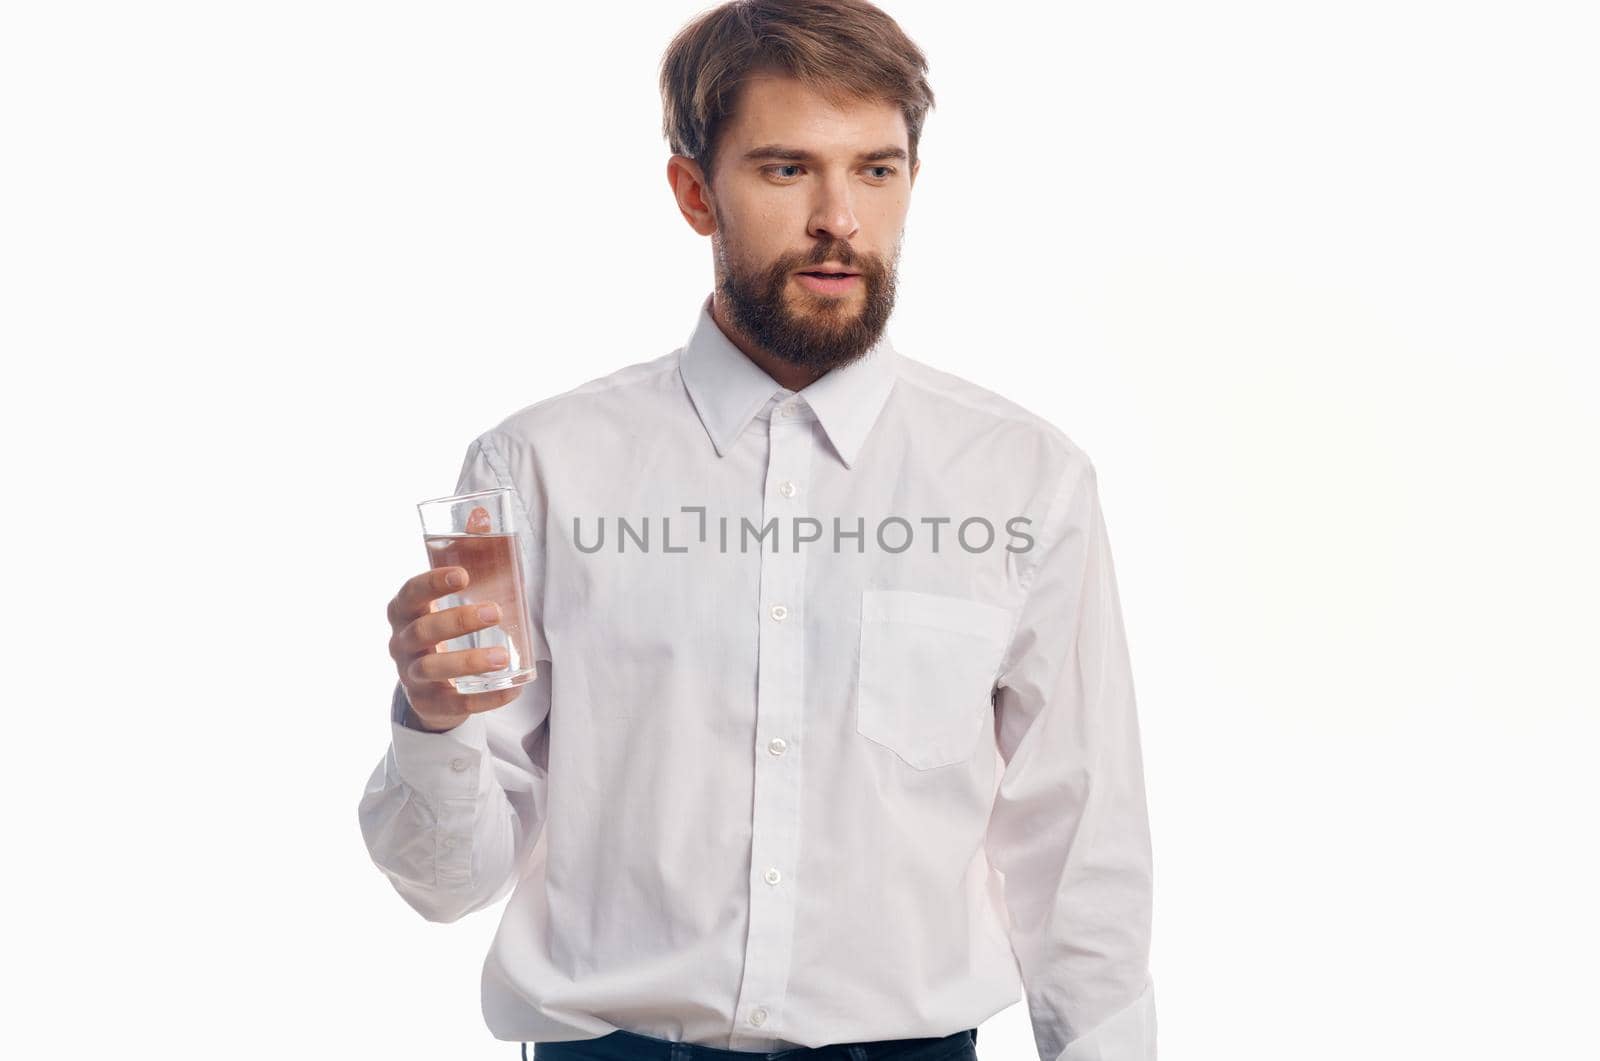 handsome man with glass of water healthy lifestyle white shirt light background. High quality photo